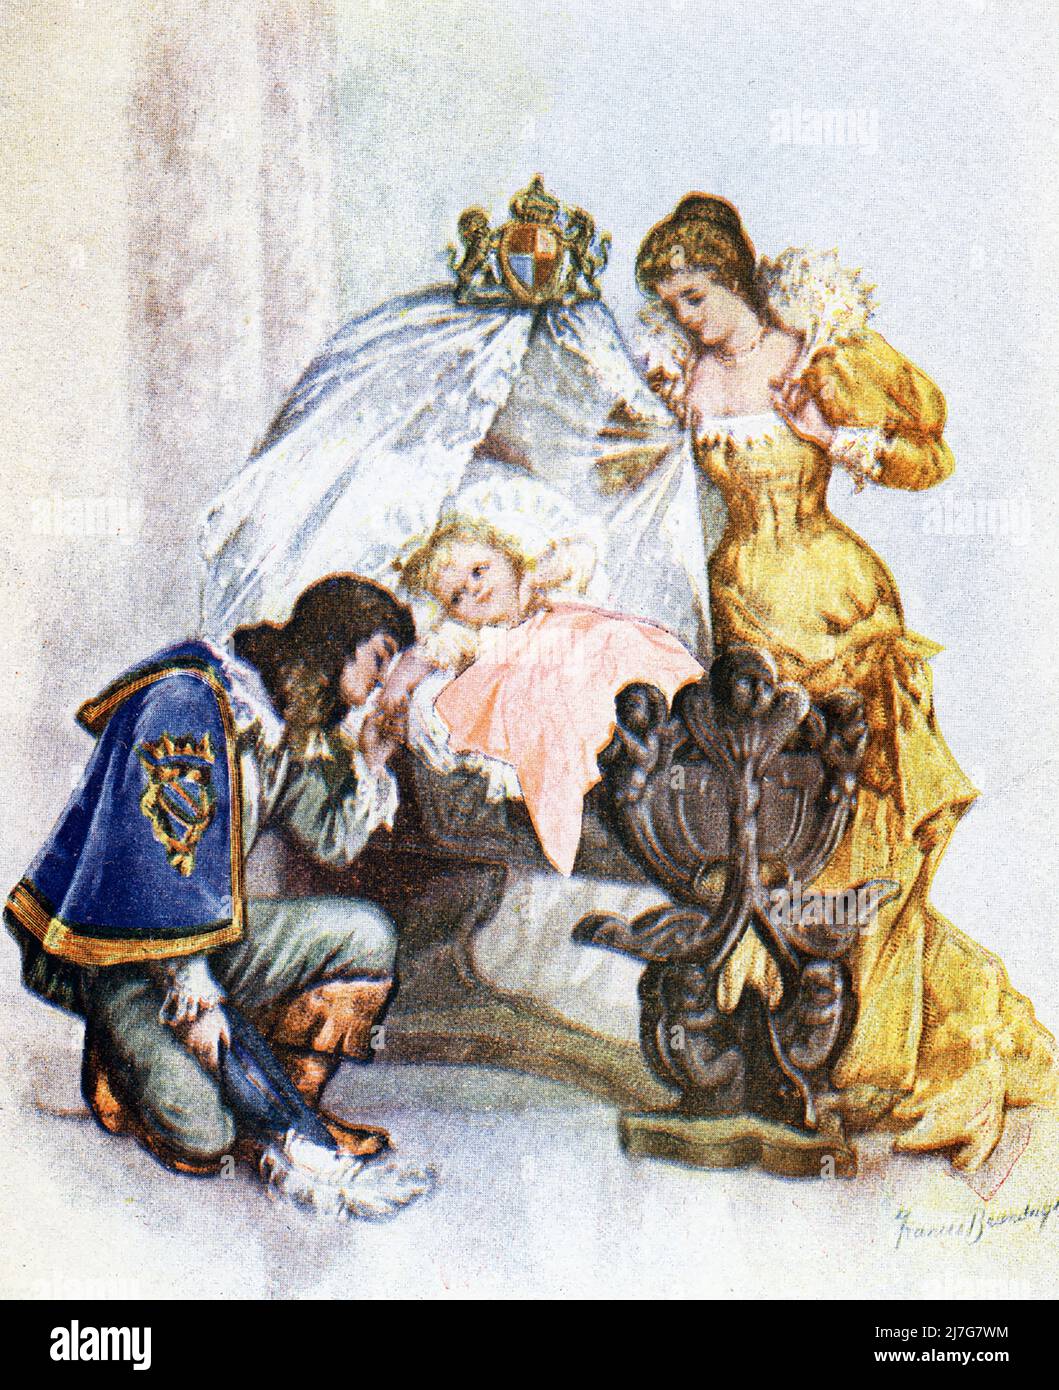 This image, dating to around 1899, shows the Henry the Fifth with his son, the baby king. Henry was born on 6 December 1421 at Windsor Castle, the only child and heir of King Henry V. Succeeding to the throne as King of England at the age of nine months on 1 September 1422, the day after his father's death; he remains the youngest person ever to succeed to the English throne. The artist is Frances Brundage, an American who died in 1937. Stock Photo